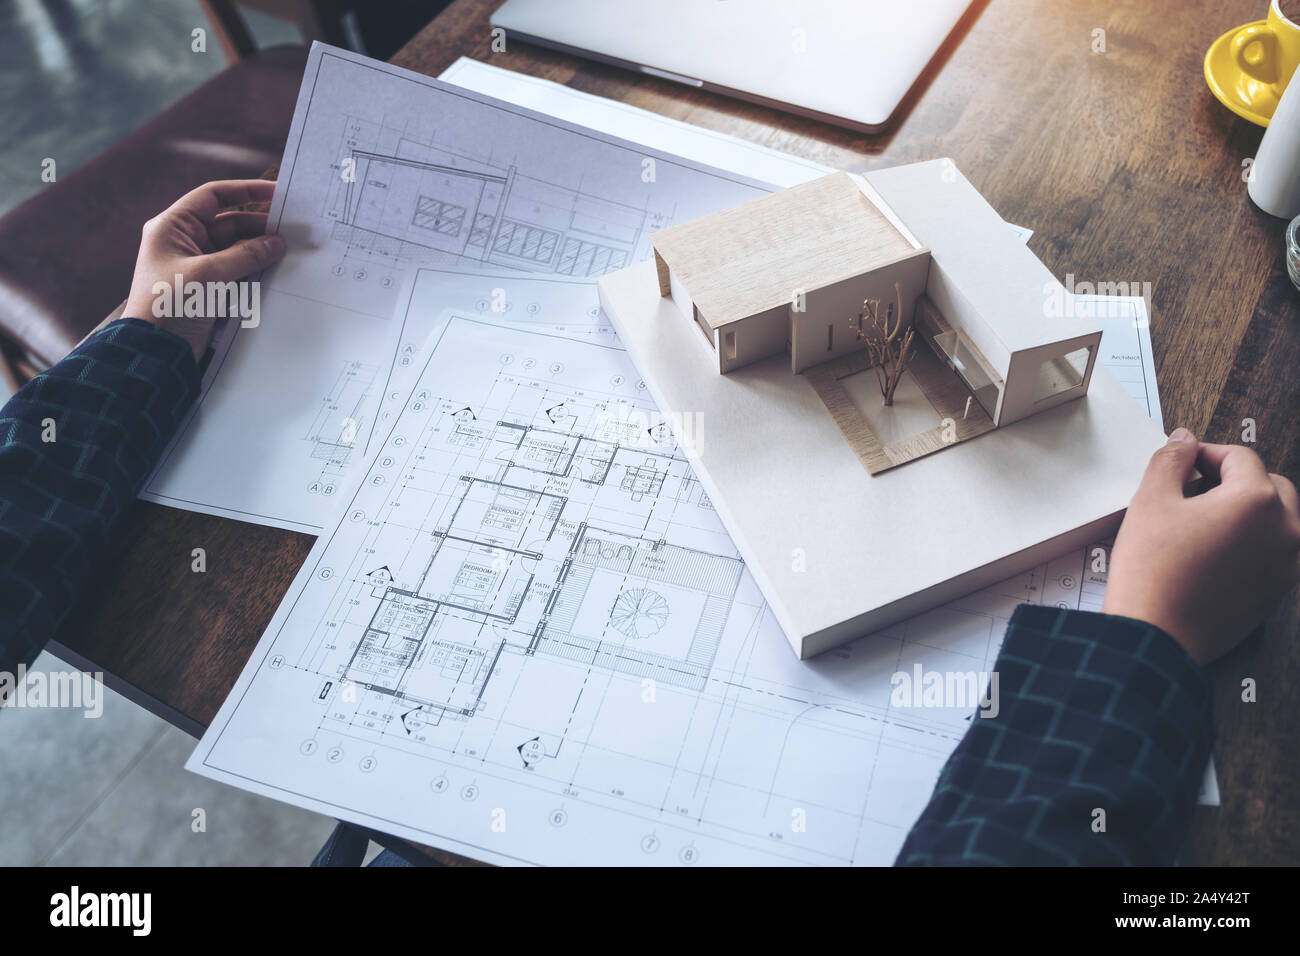 An architect working and looking at an architecture model with shop drawing paper on table Stock Photo